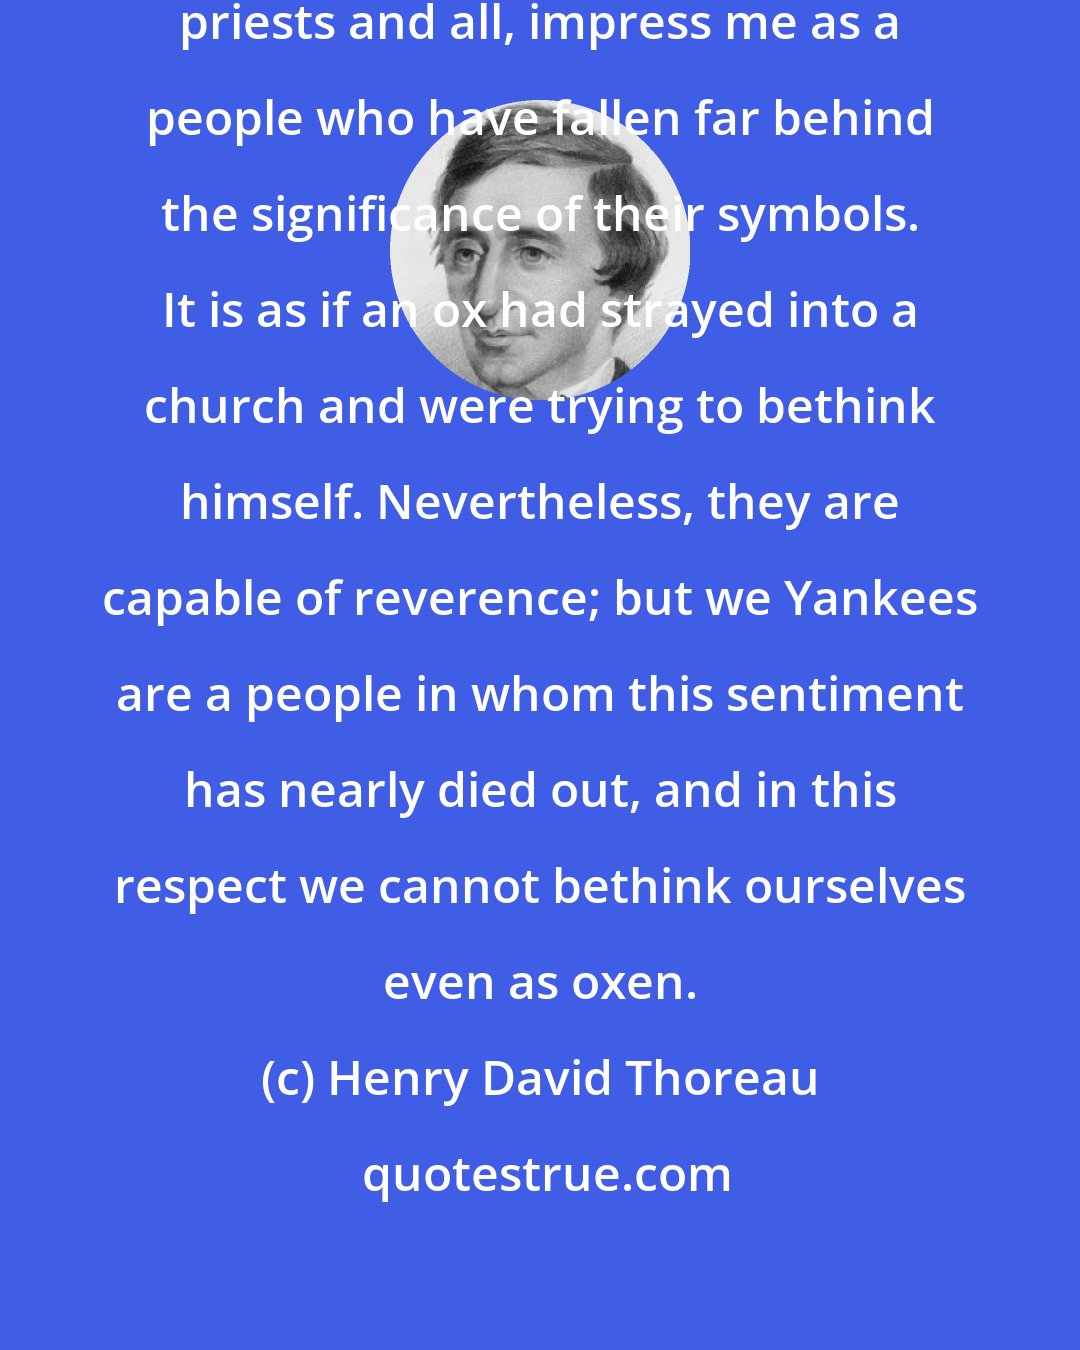 Henry David Thoreau: It is true, these Roman Catholics, priests and all, impress me as a people who have fallen far behind the significance of their symbols. It is as if an ox had strayed into a church and were trying to bethink himself. Nevertheless, they are capable of reverence; but we Yankees are a people in whom this sentiment has nearly died out, and in this respect we cannot bethink ourselves even as oxen.